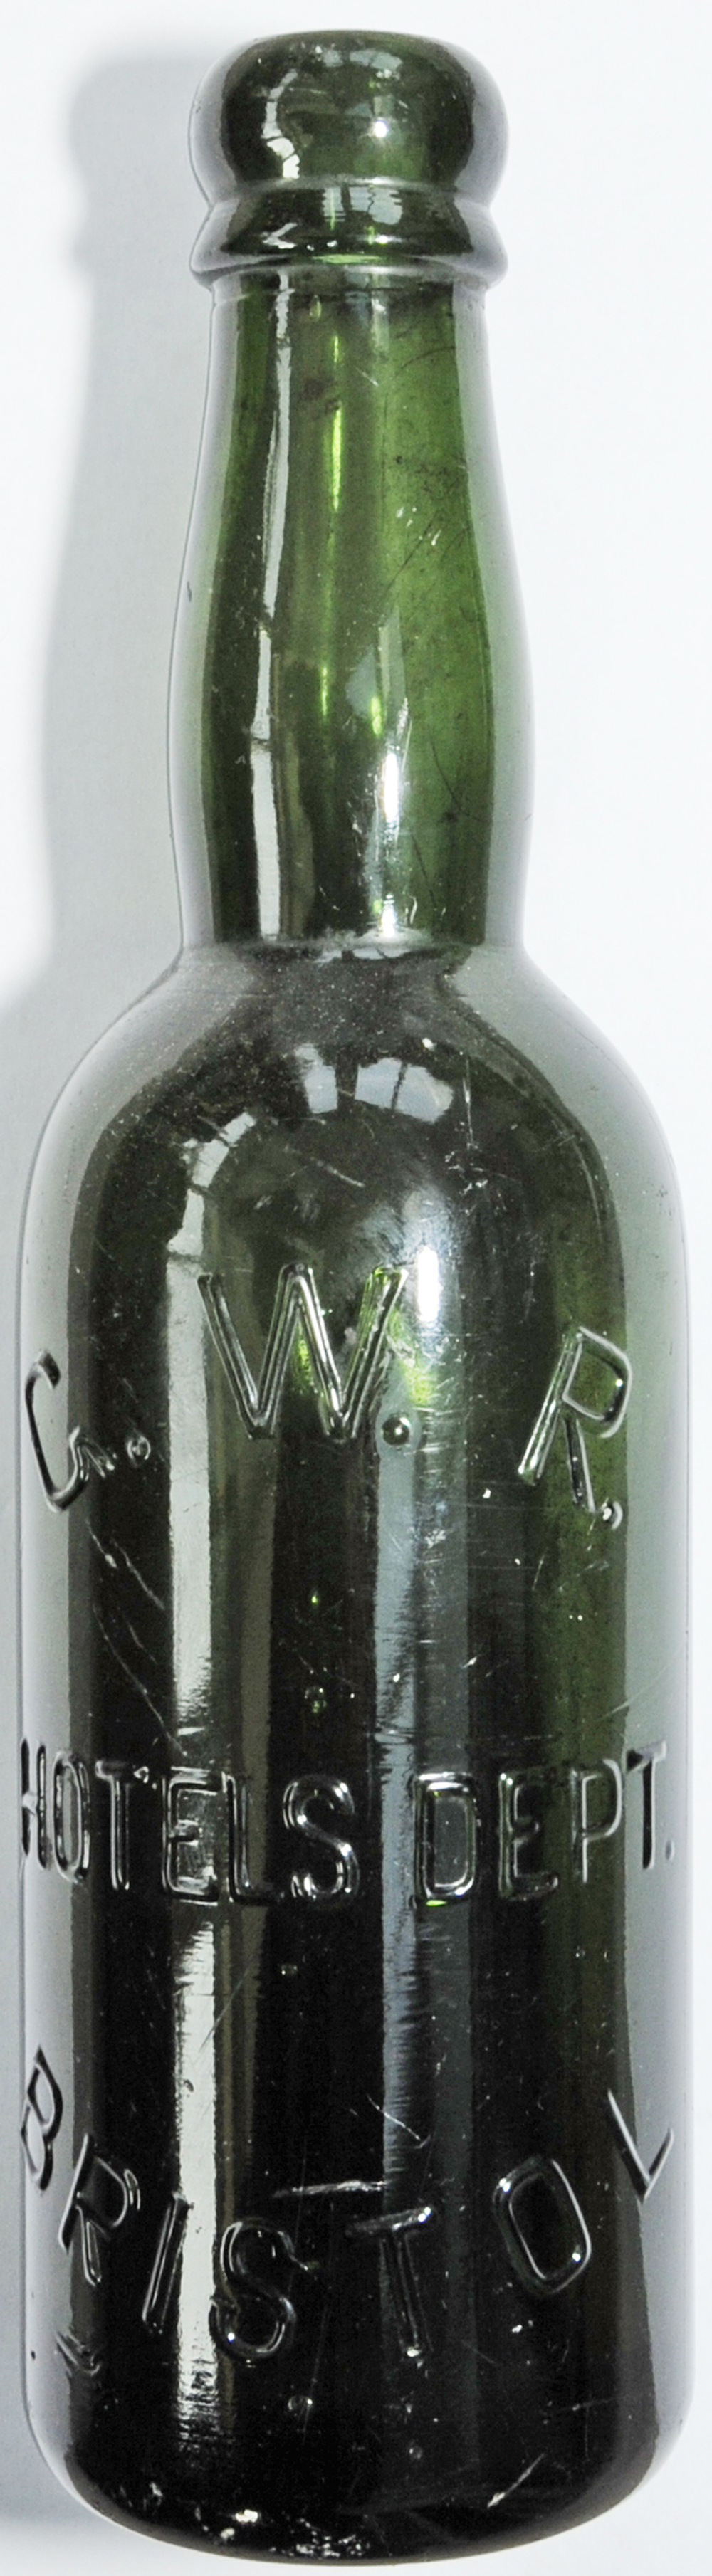 GWR green ½ pint Beer Bottle nicely embossed GWR Hotels Dept Bristol. Standing 9" tall, it is in